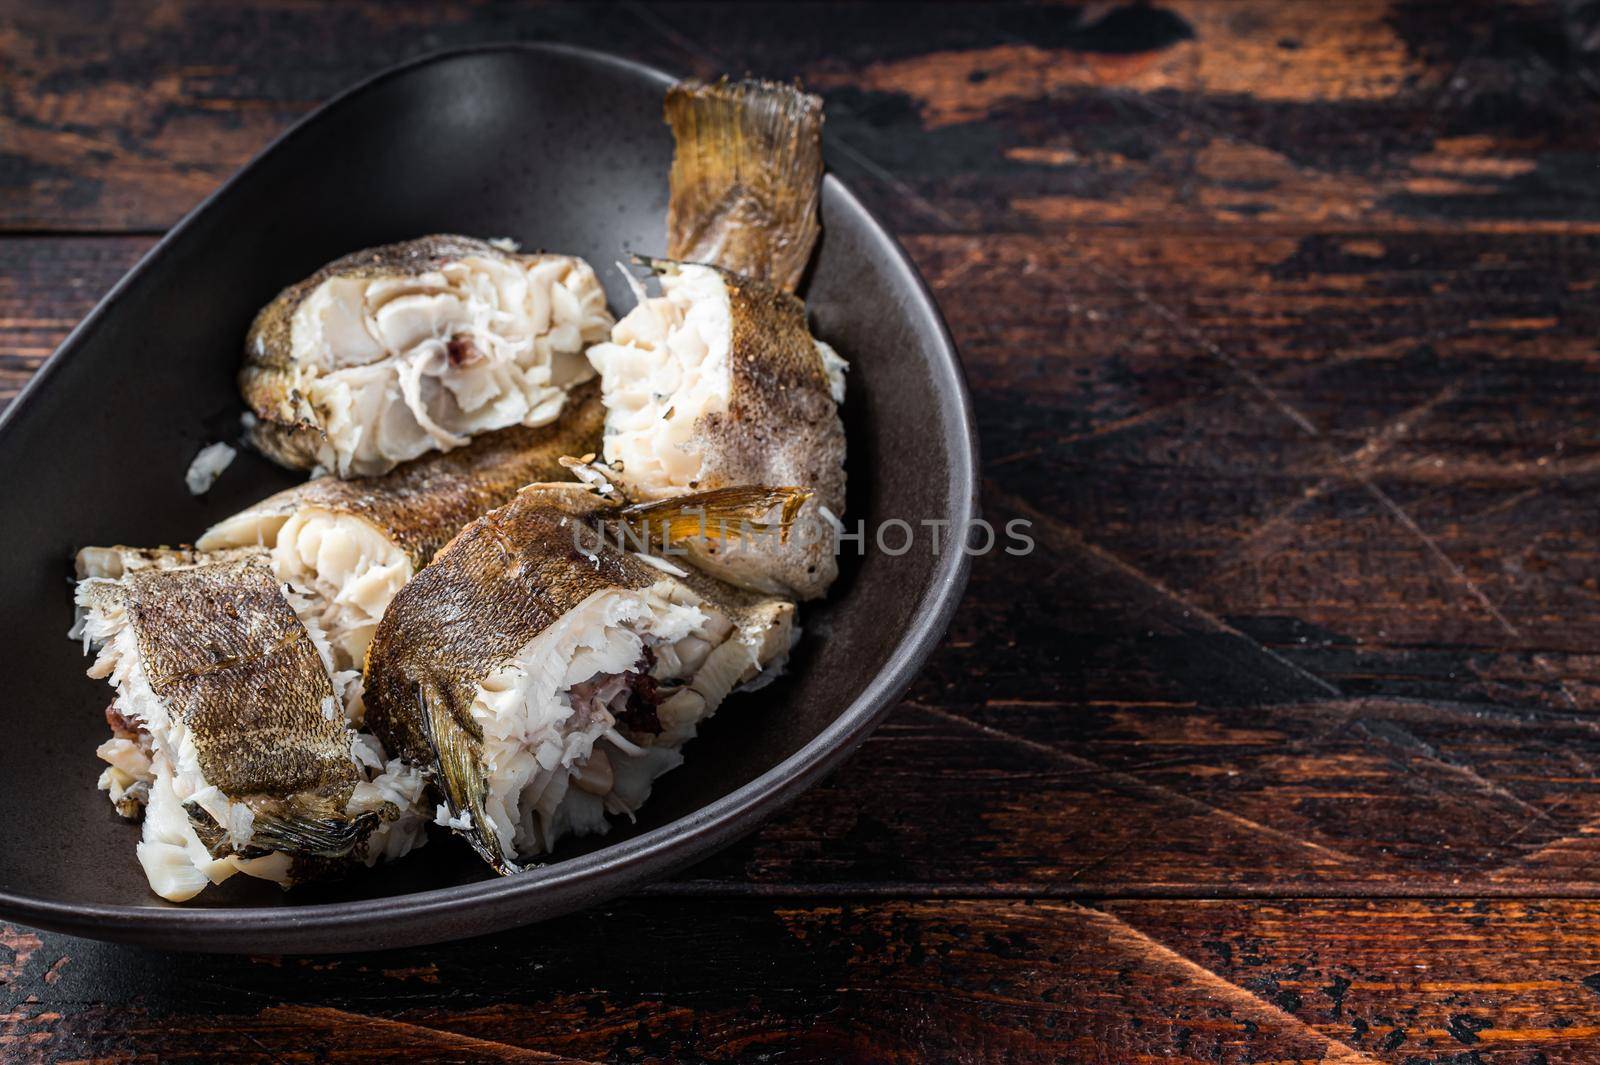 Roasted hake white fish in a plate. Dark wooden background. Top view. Copy space.